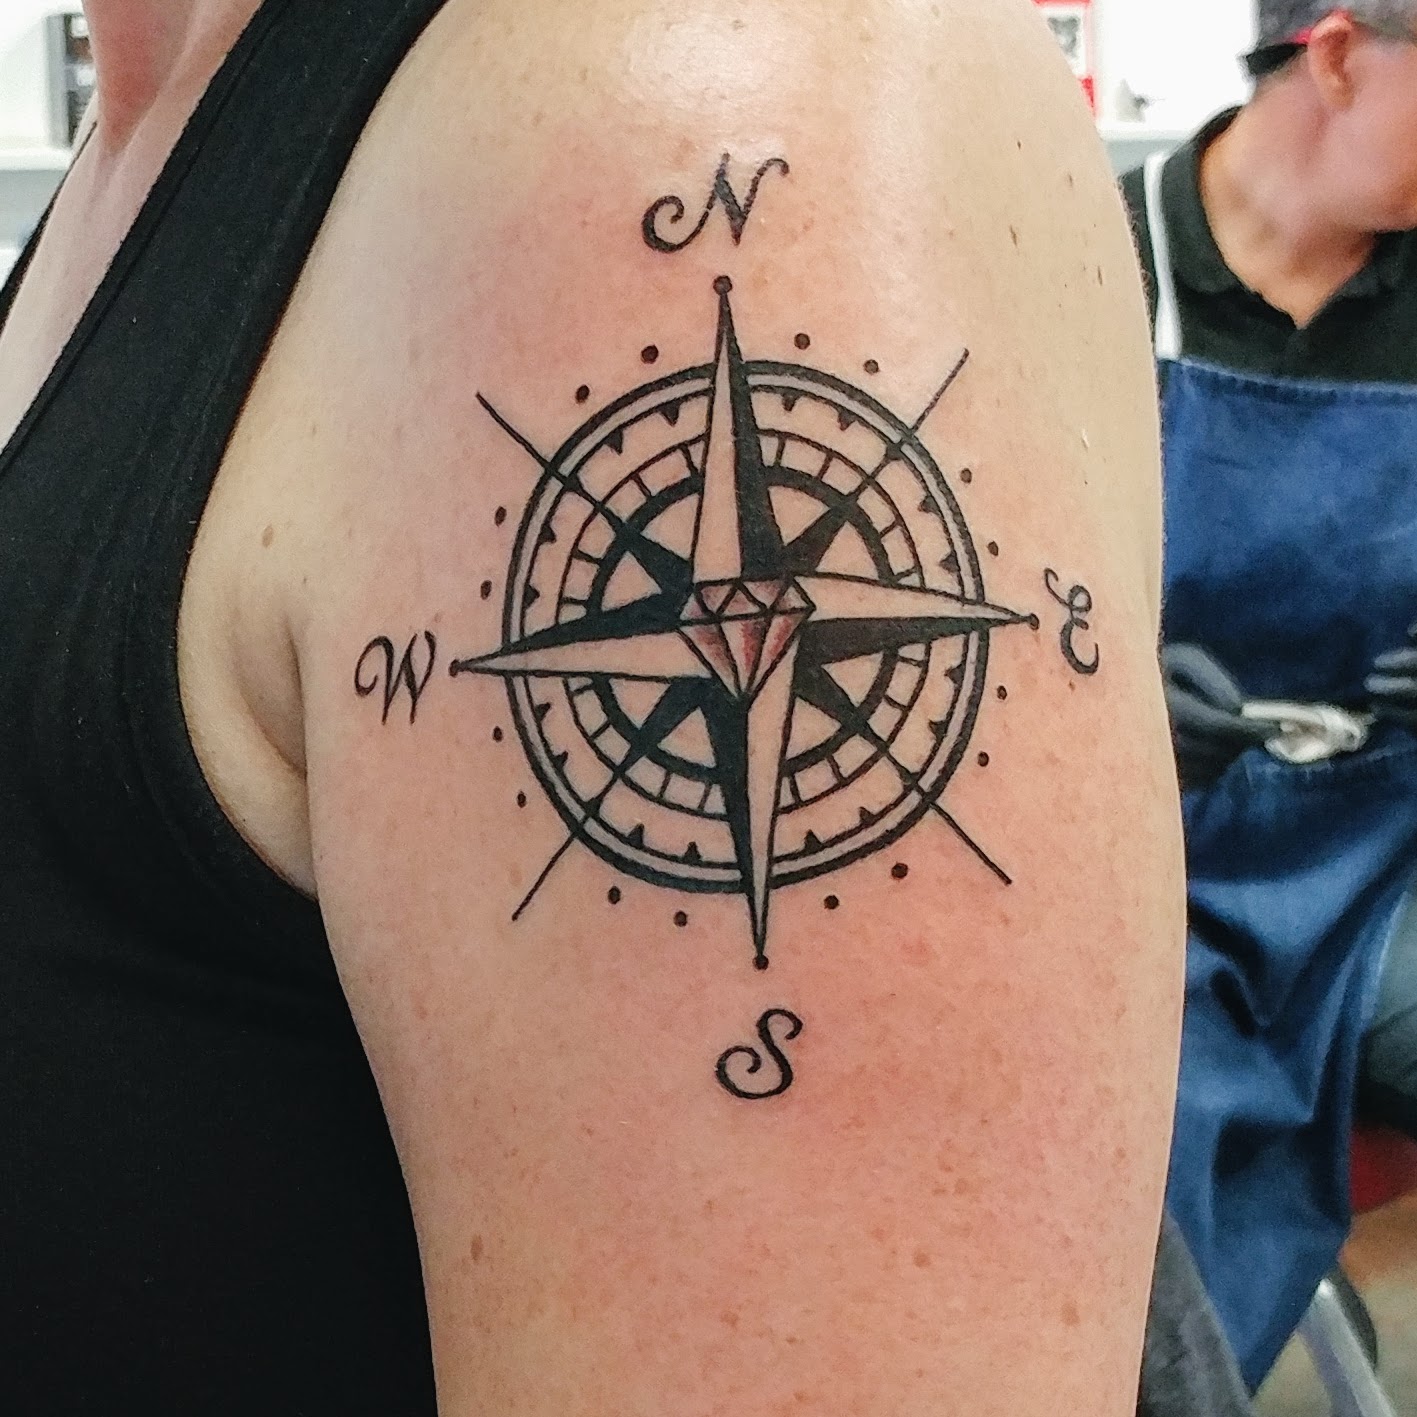 Compass rose tattoo, by Sam McWilliams, Vancouver, BC. https://www.kimwerker.com/blog